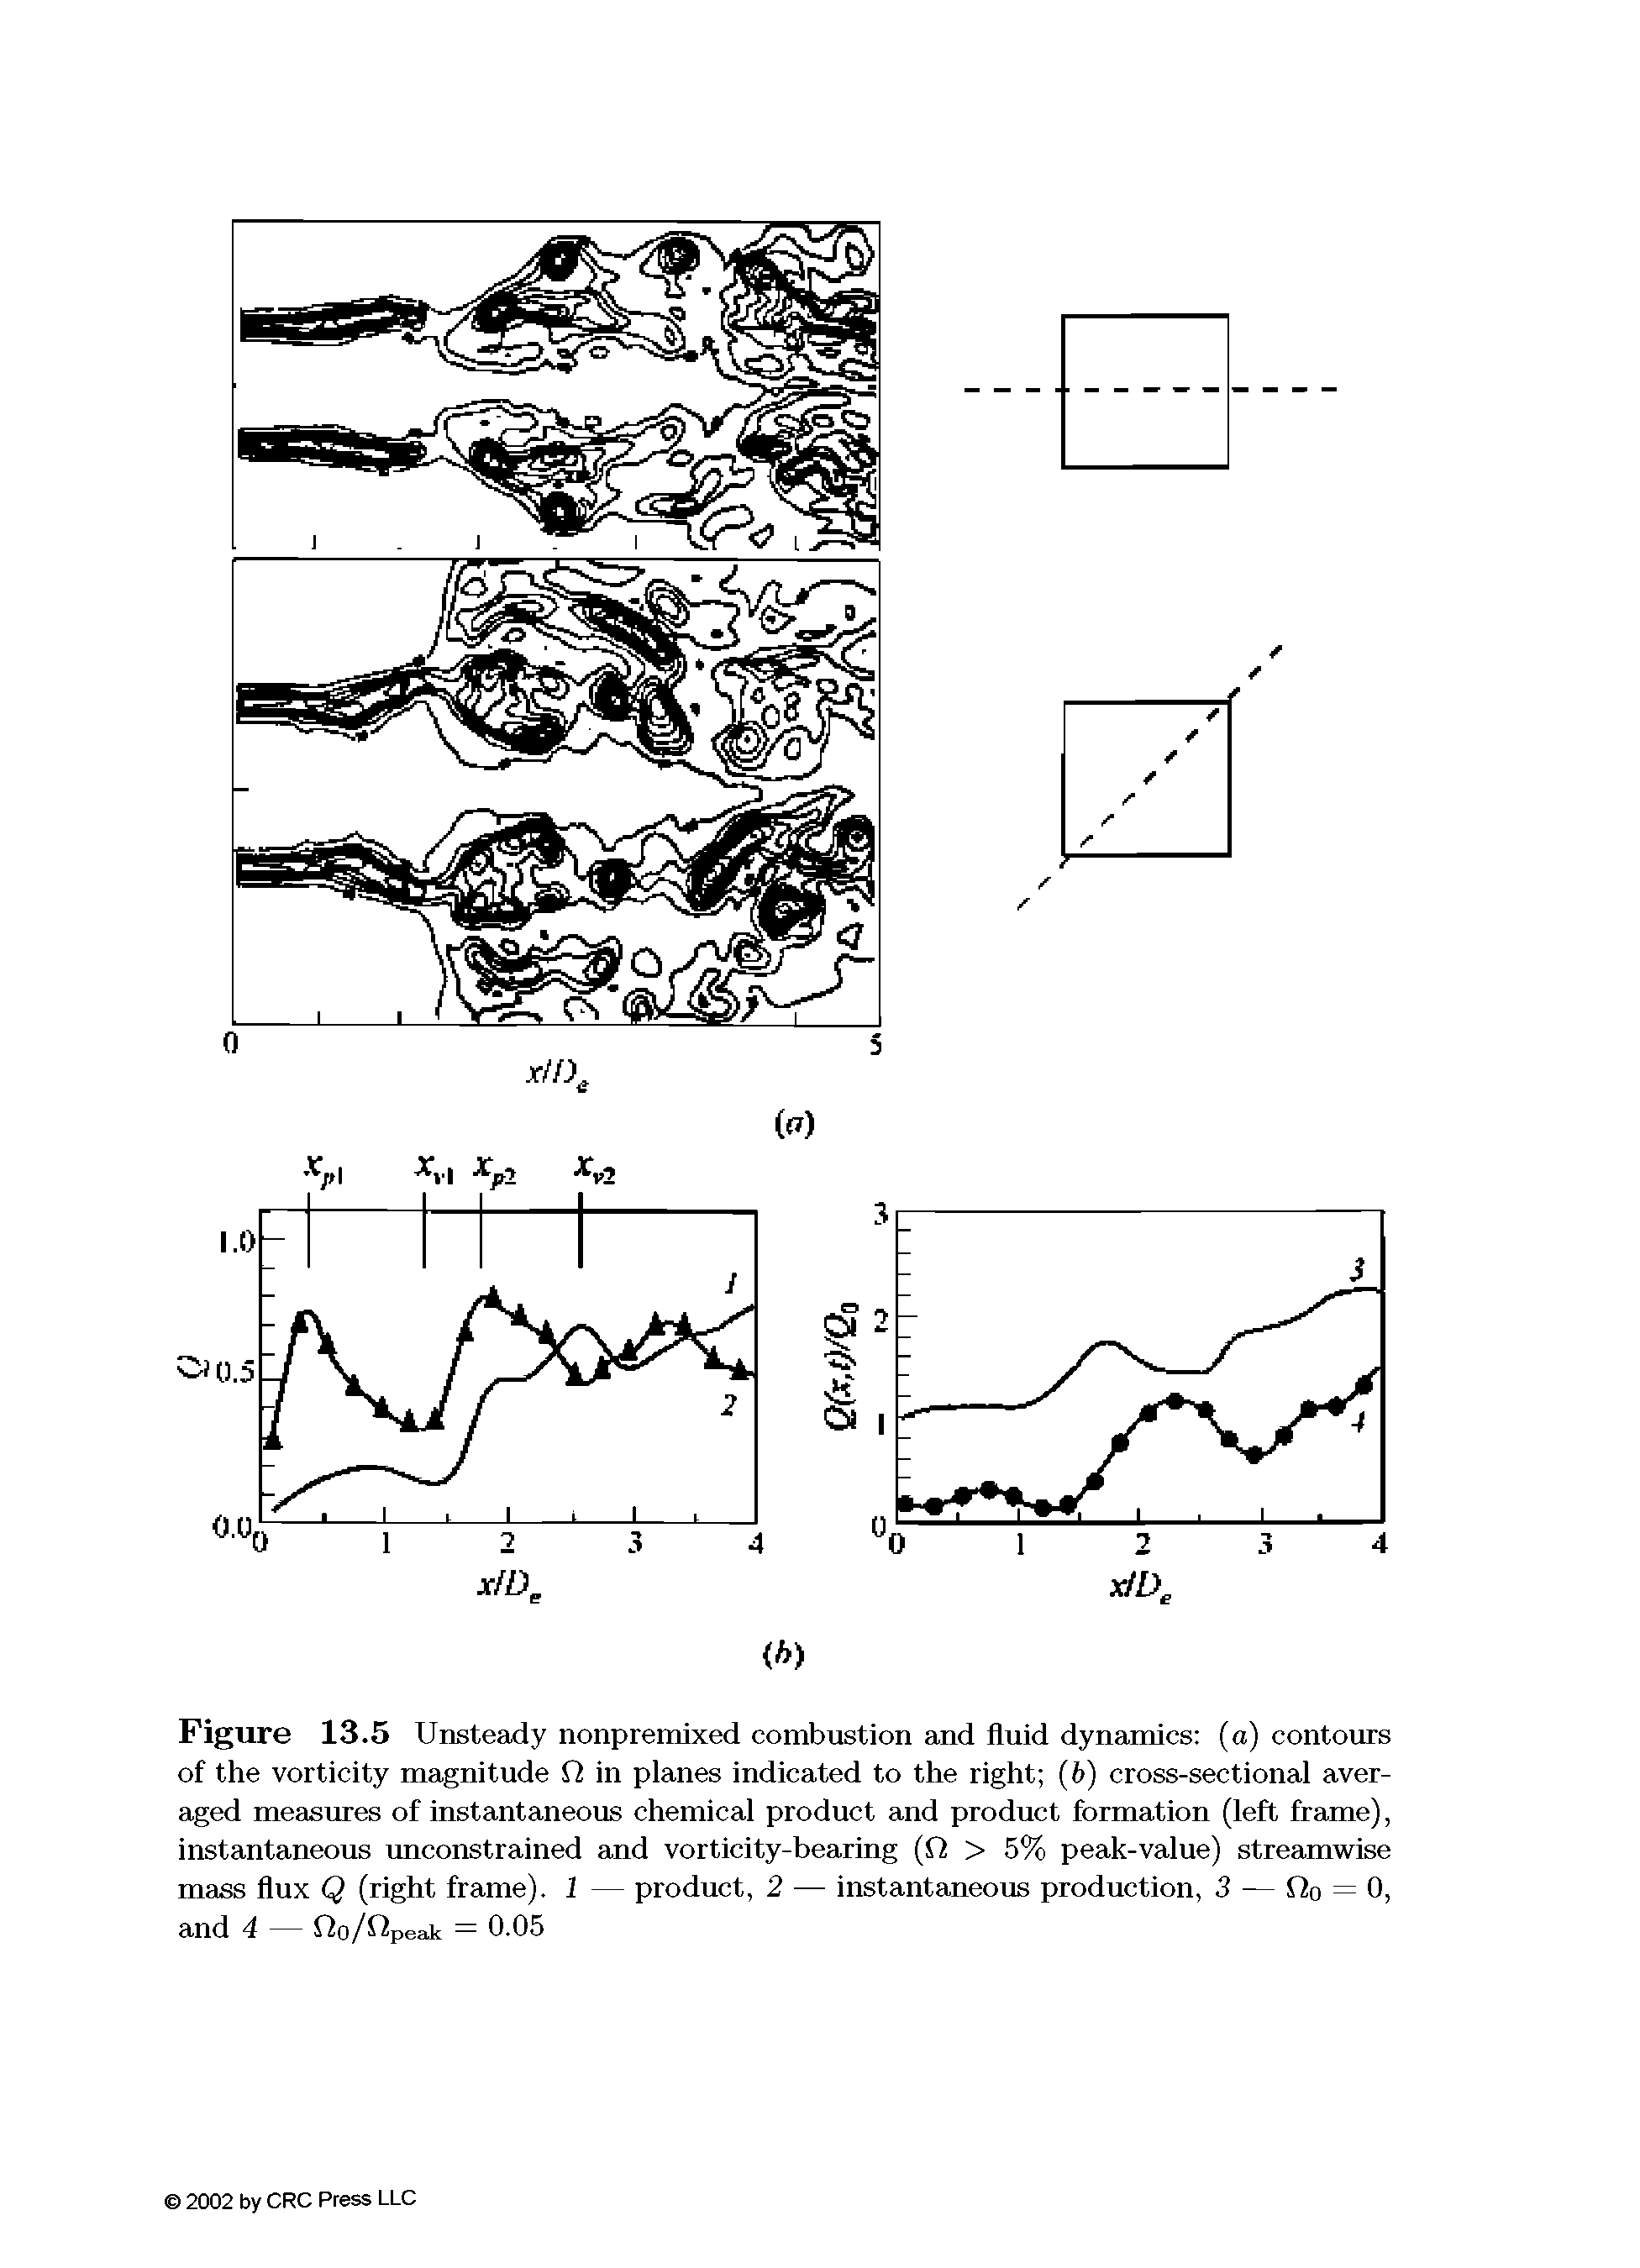 Figure 13.5 Unsteady nonpremixed combustion and fluid dynamics (a) contours of the vorticity magnitude O in planes indicated to the right (6) cross-sectional averaged measures of instantaneous chemical product and product formation (left frame), instantaneous unconstrained and vorticity-bearing (ff > 5% peak-value) streamwise mass flux Q (right frame). 1 — product, 2 — instantaneous production, 3 — Oo = 0, and 4 flo/f peak — 0.05...